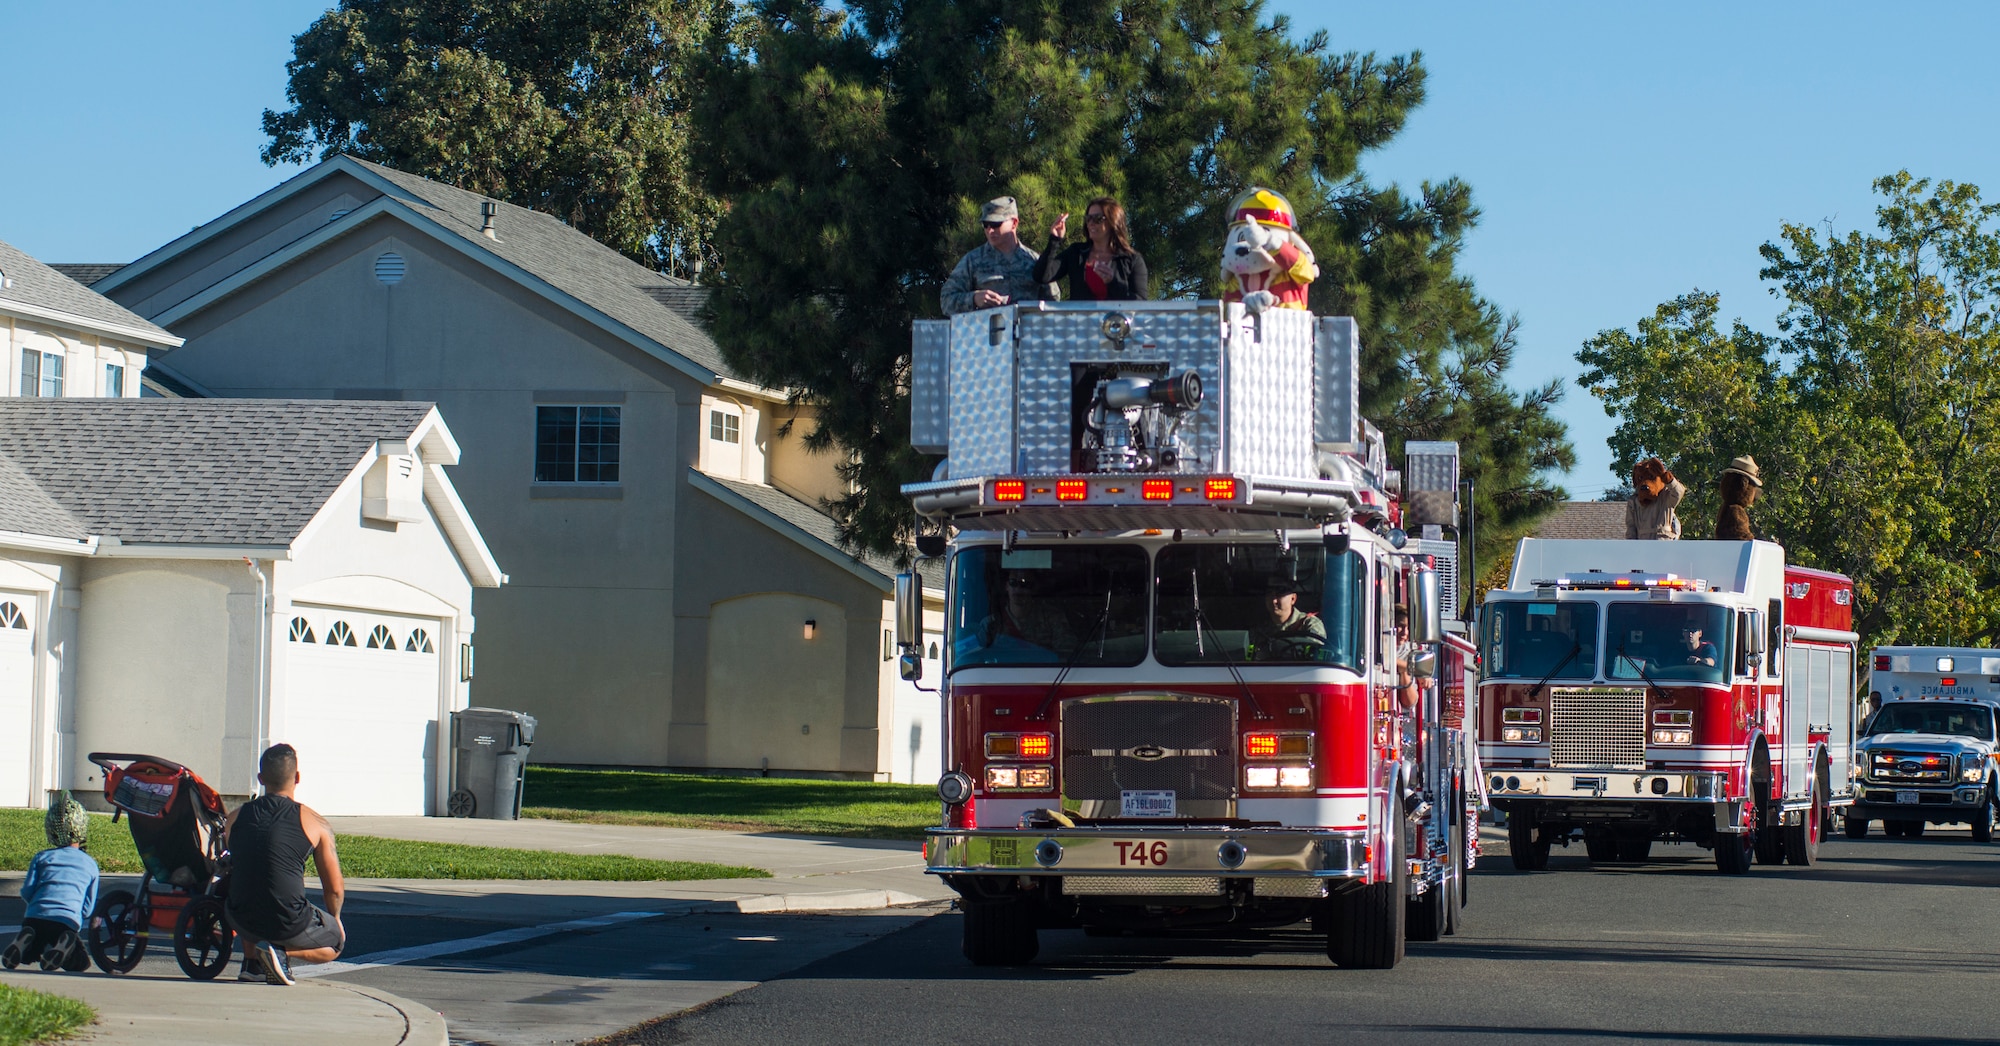 The Travis Air Force Base fire department held a parade and open house as part of Fire Prevention Week.